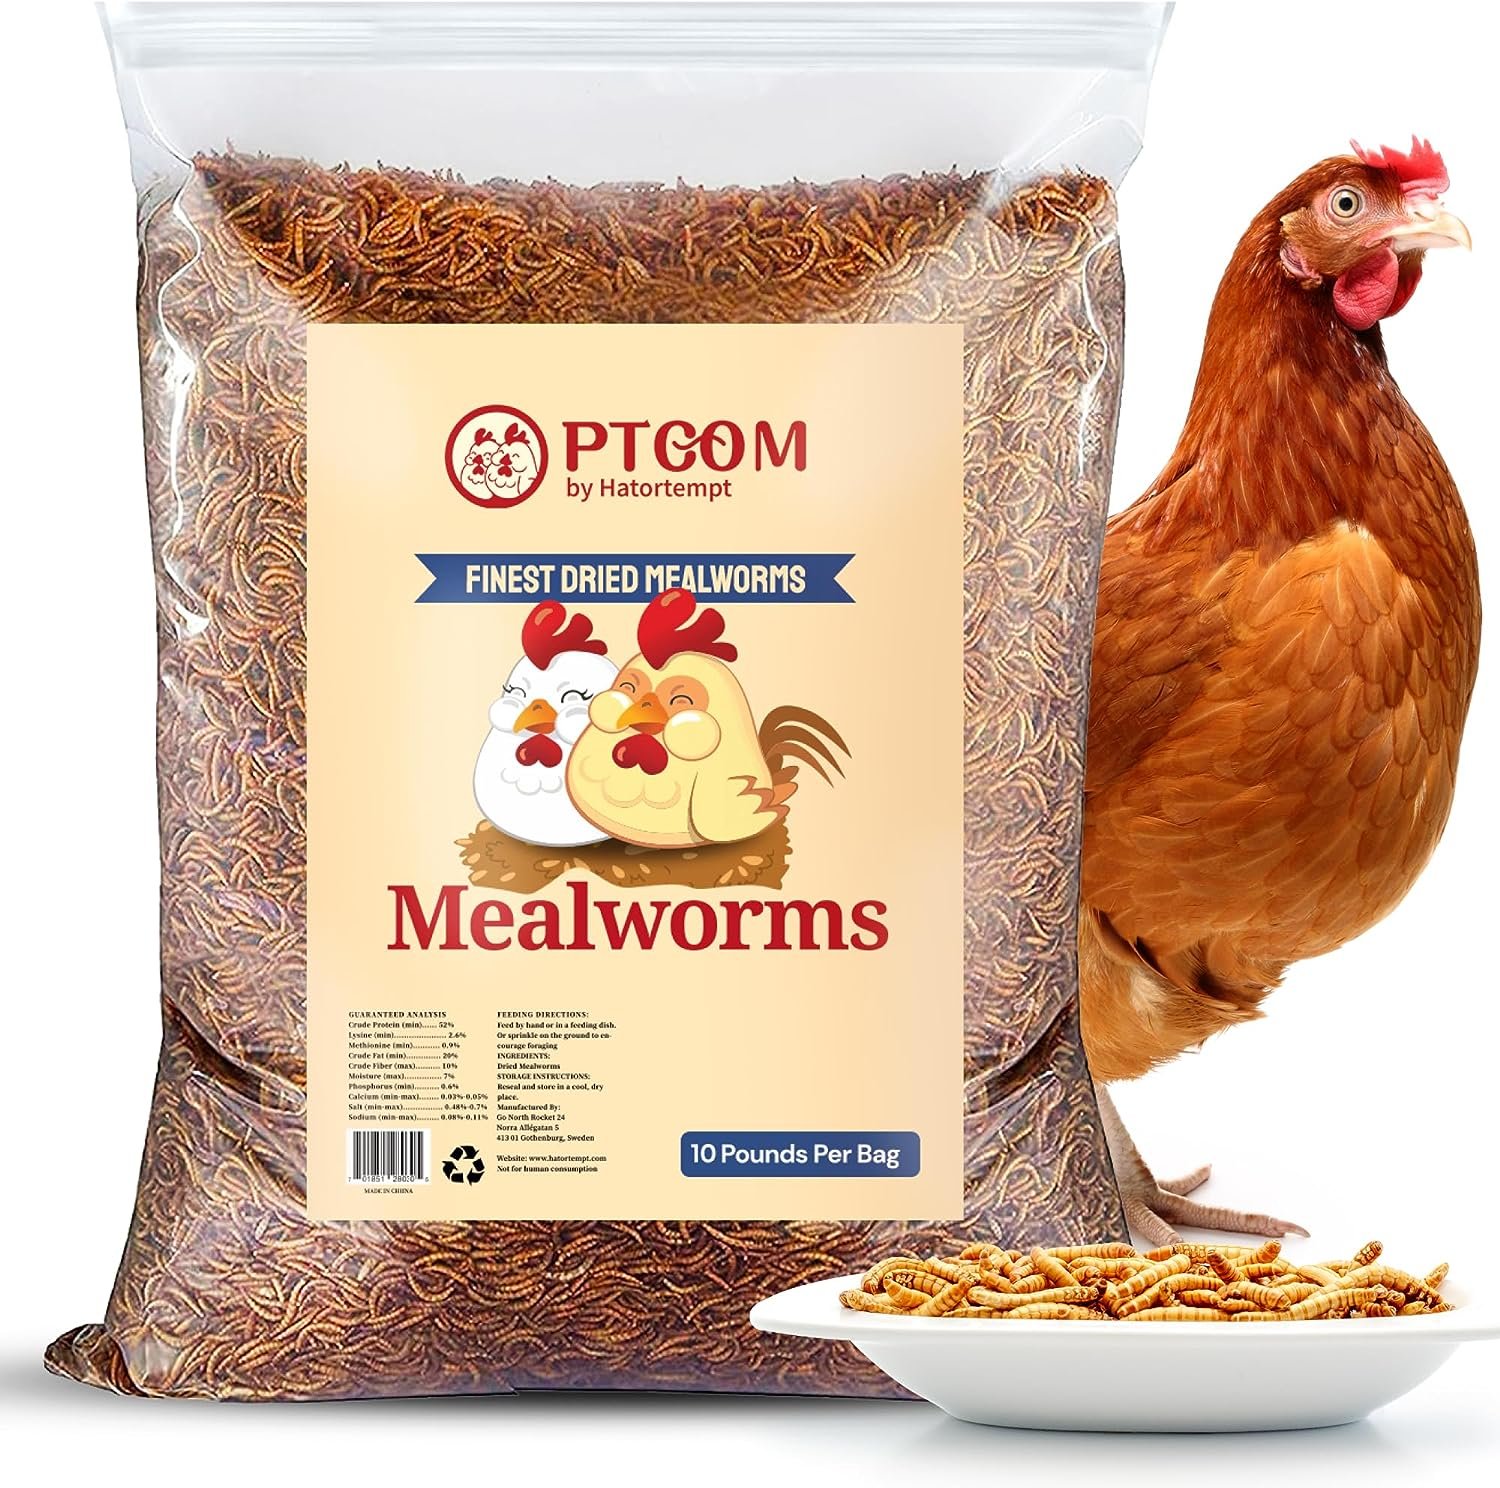 Hatortempt 10lbs Bulk Dried Mealworms - Premium Non-GMO Organic Chicken Feed, Nutritious High Protein Meal Worms- Food and Treats for Laying Hens, Wild Birds, Ducks, Reptiles, Fish, Hedgehogs, Turtles